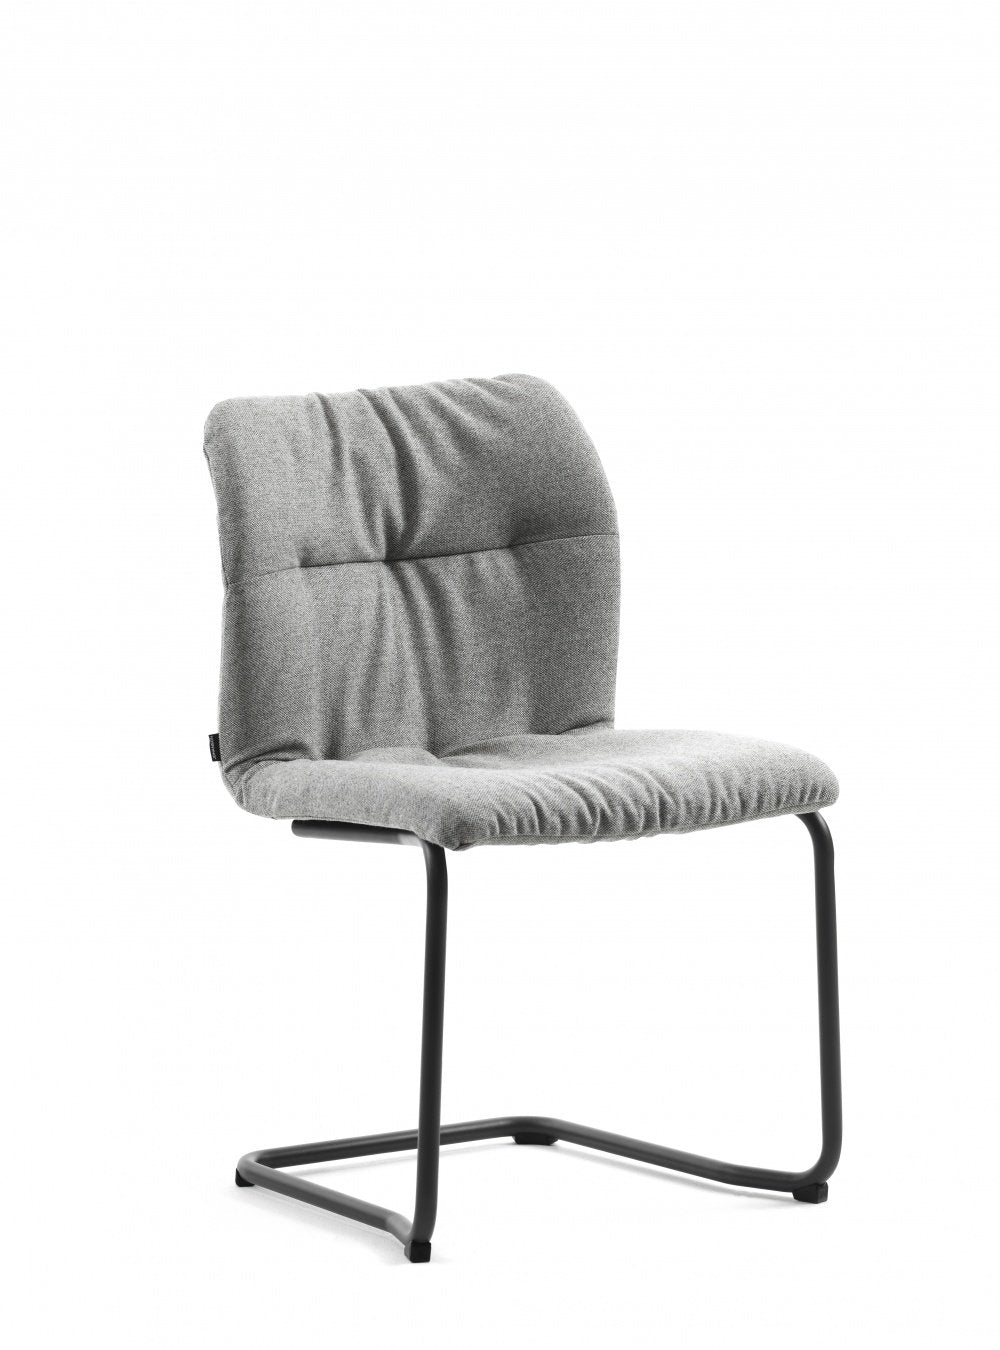 Haddoc Oyster 10 Side Chair-Johanson Design-Contract Furniture Store